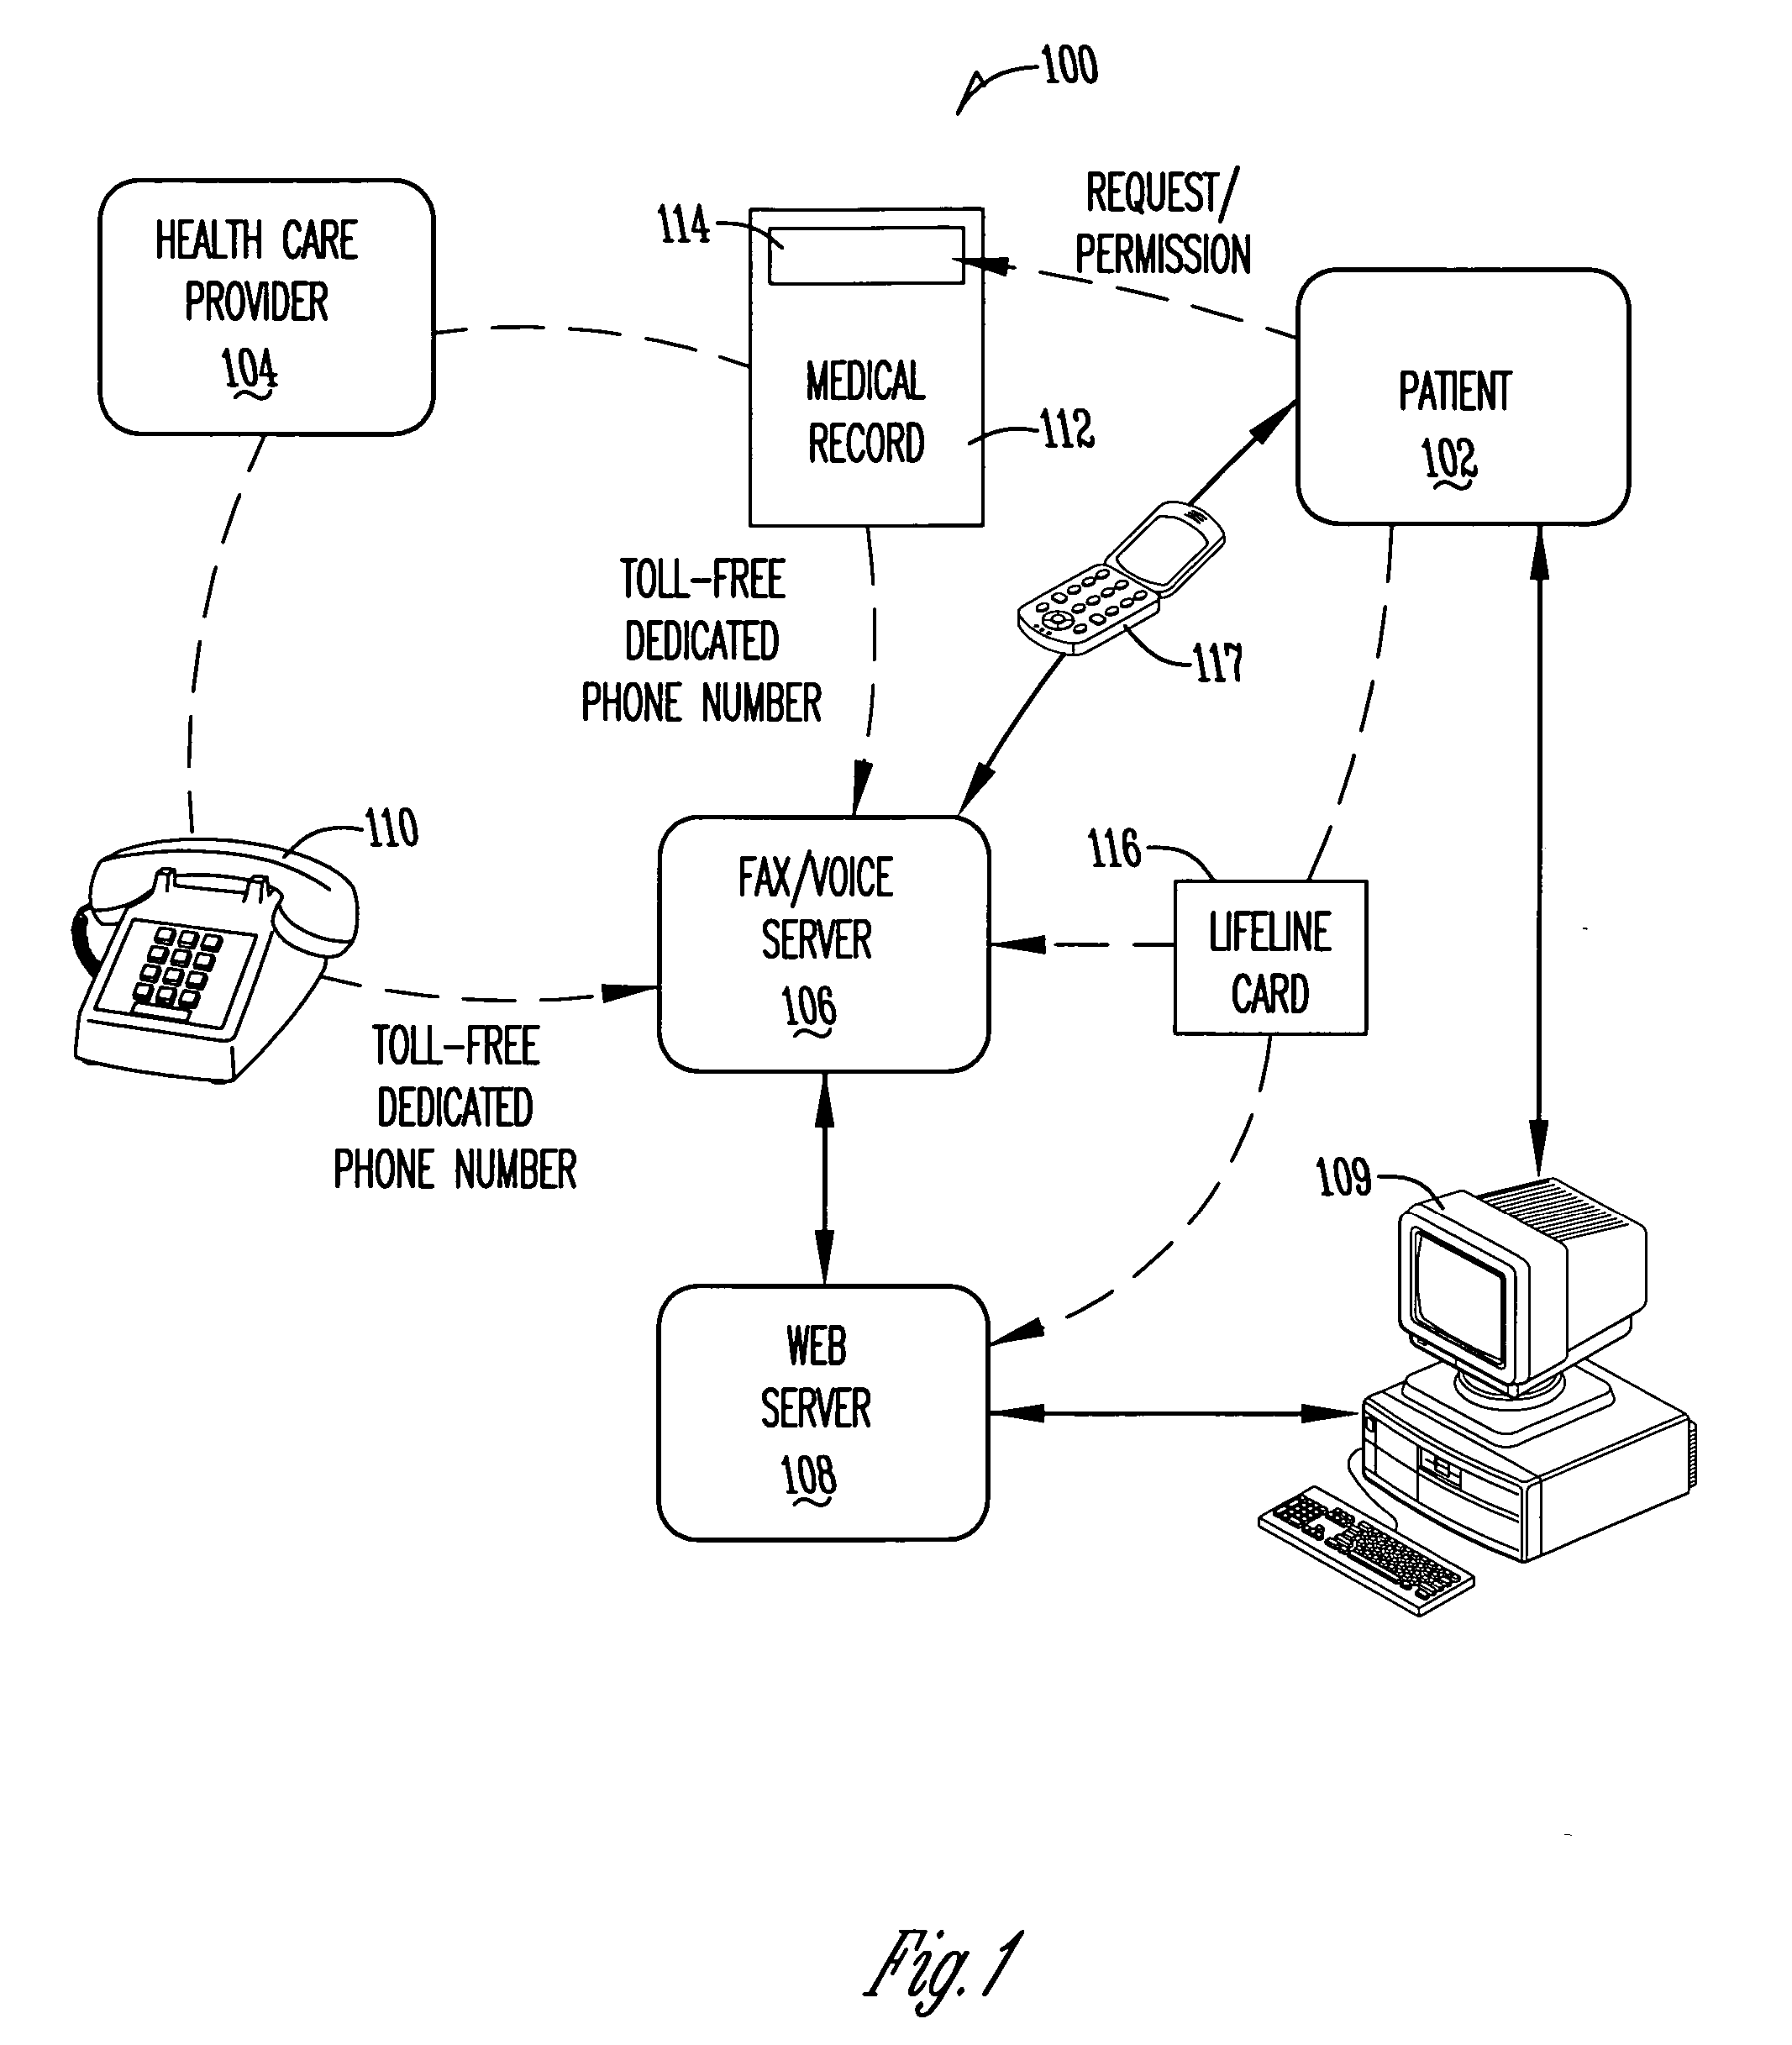 Method and system for providing online medical records